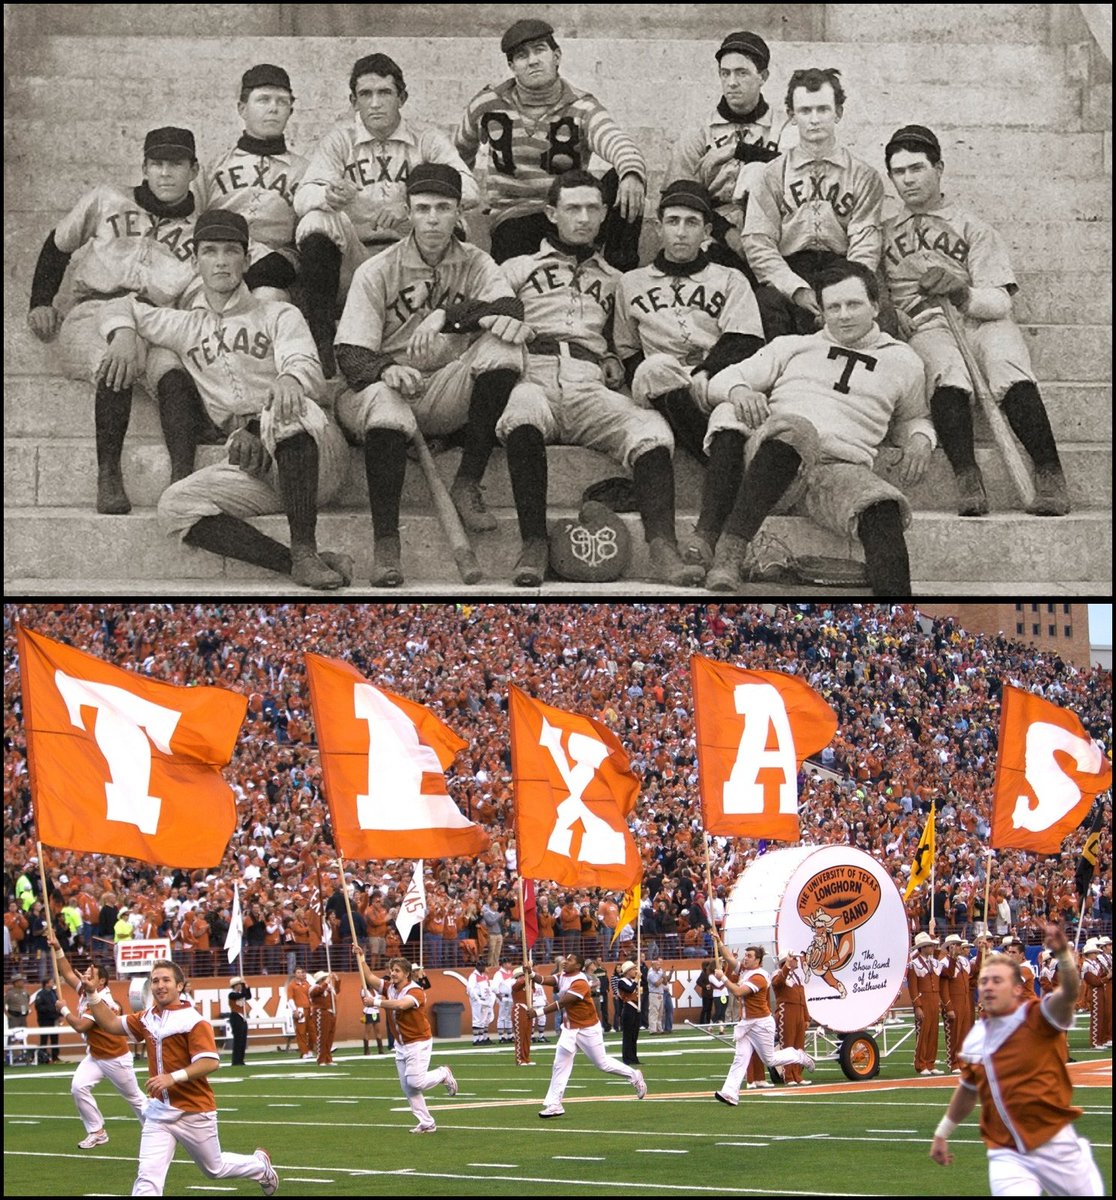 Happy 139th Birthday to @UTAustin's baseball team and the University colors! April 21, 1885: UT students formed their first ever baseball team and played Southwestern University, while fans wore orange and white ribbons. Why Orange and White? bit.ly/2Xi5v3s